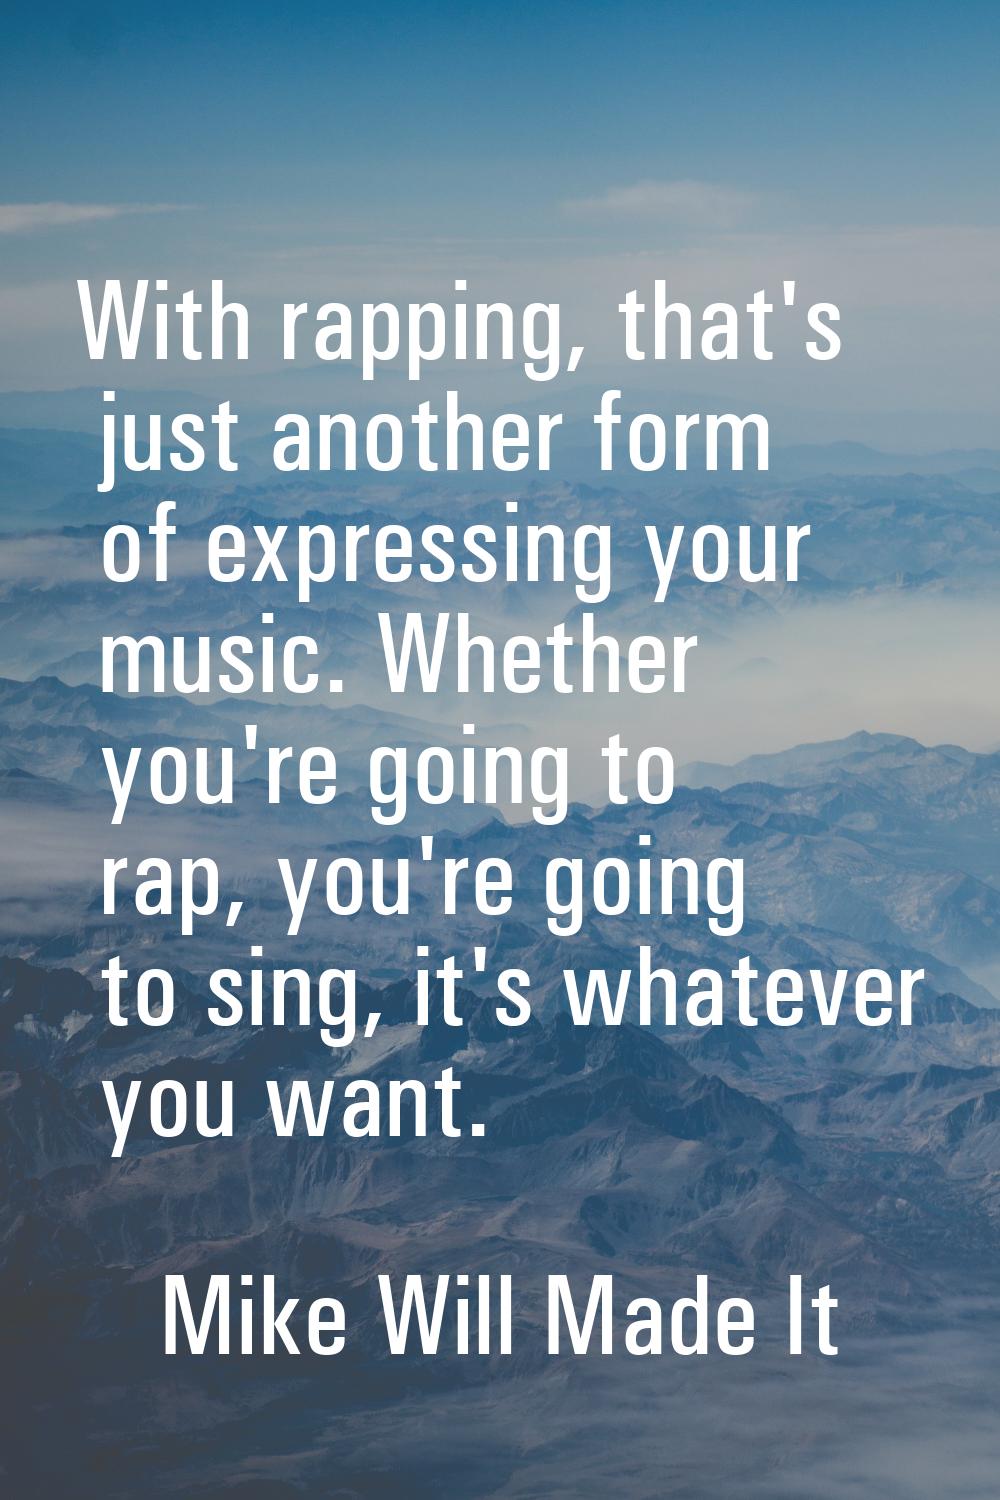 With rapping, that's just another form of expressing your music. Whether you're going to rap, you'r